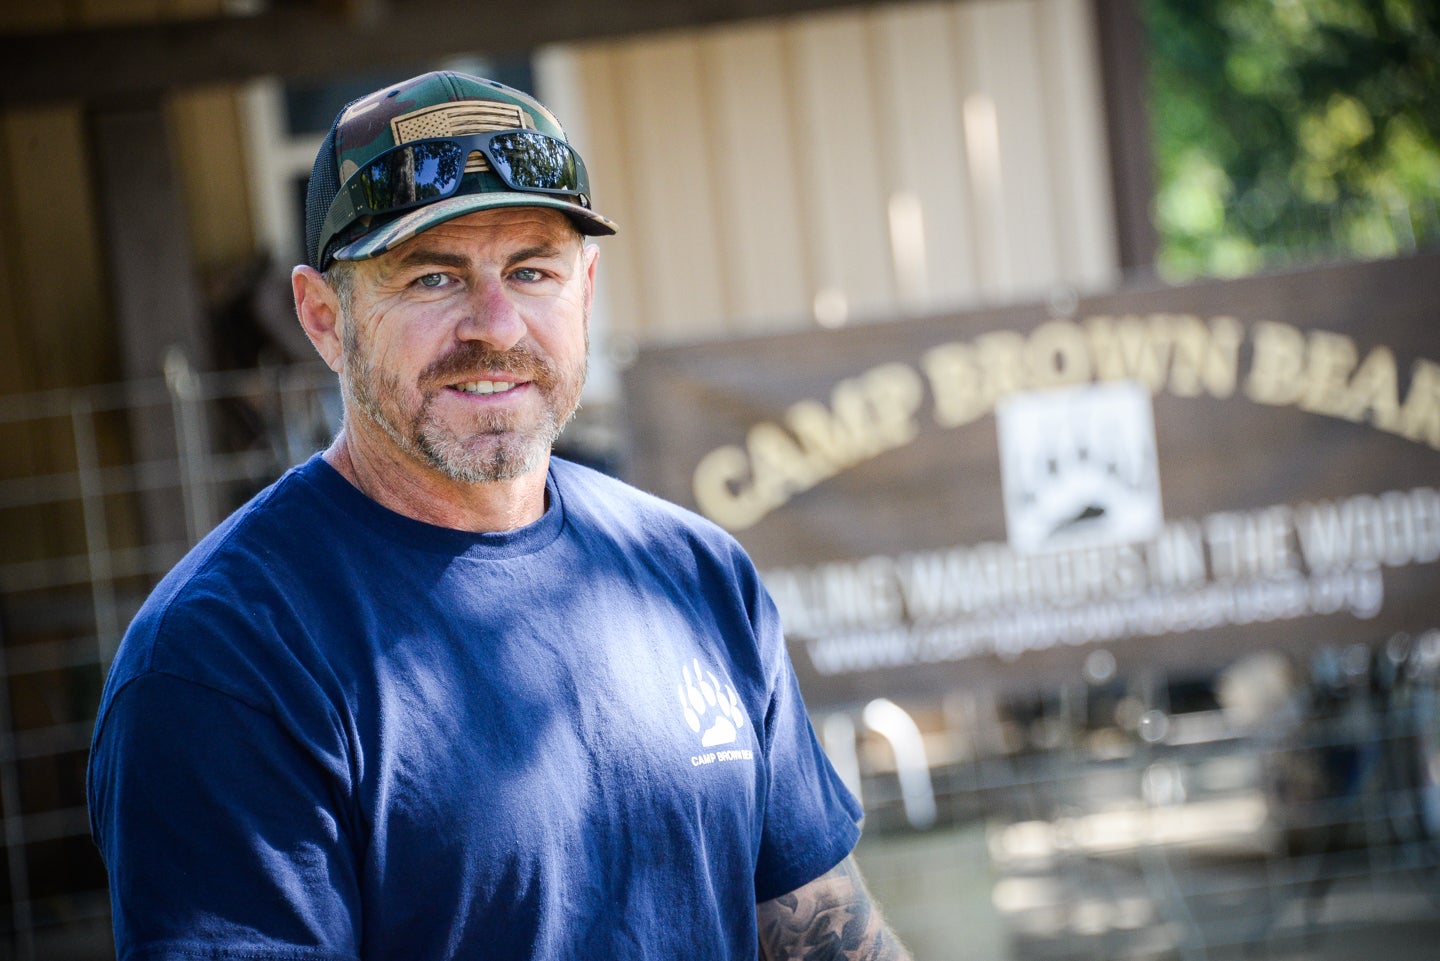 Wilderness warriors: Camp Brown Bear providing peace, tranquility to veterans